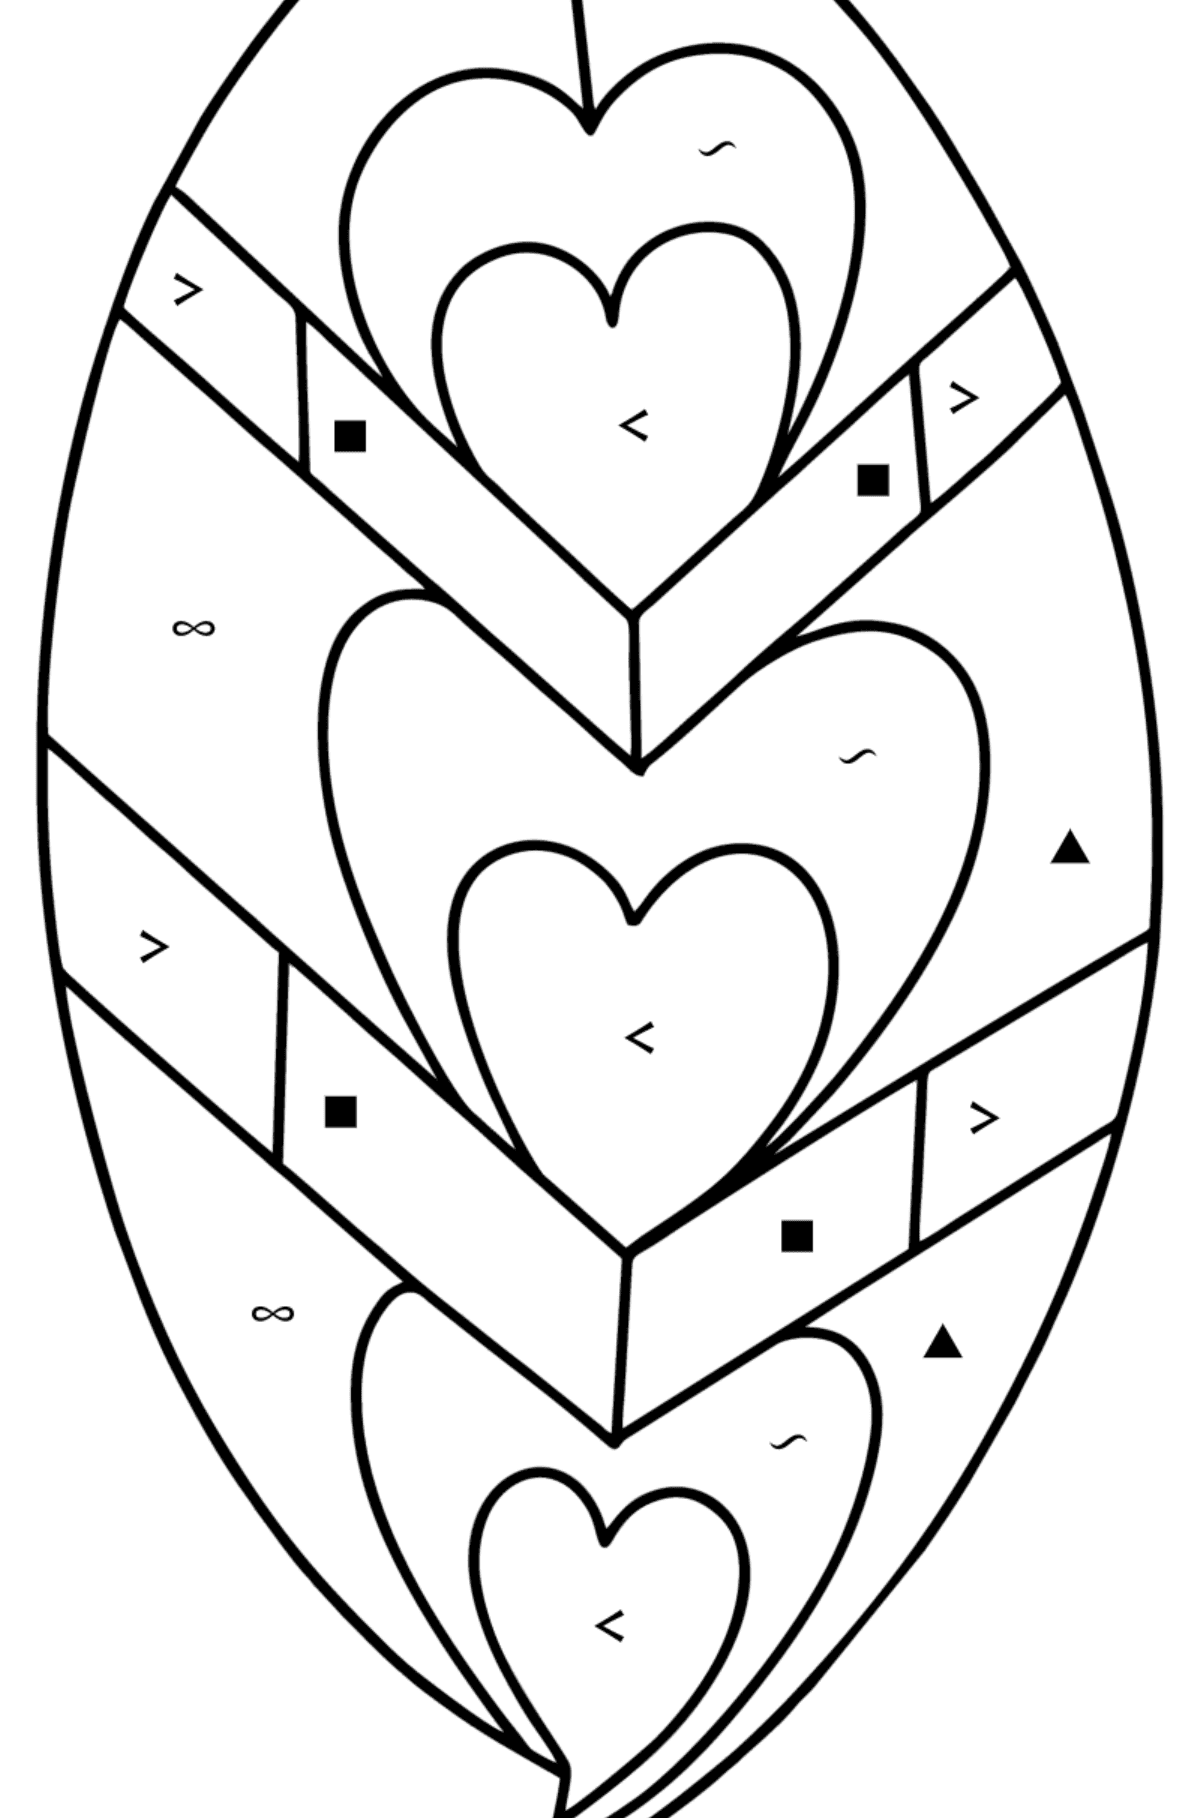 Zentangle Leaf coloring page - Coloring by Symbols for Kids